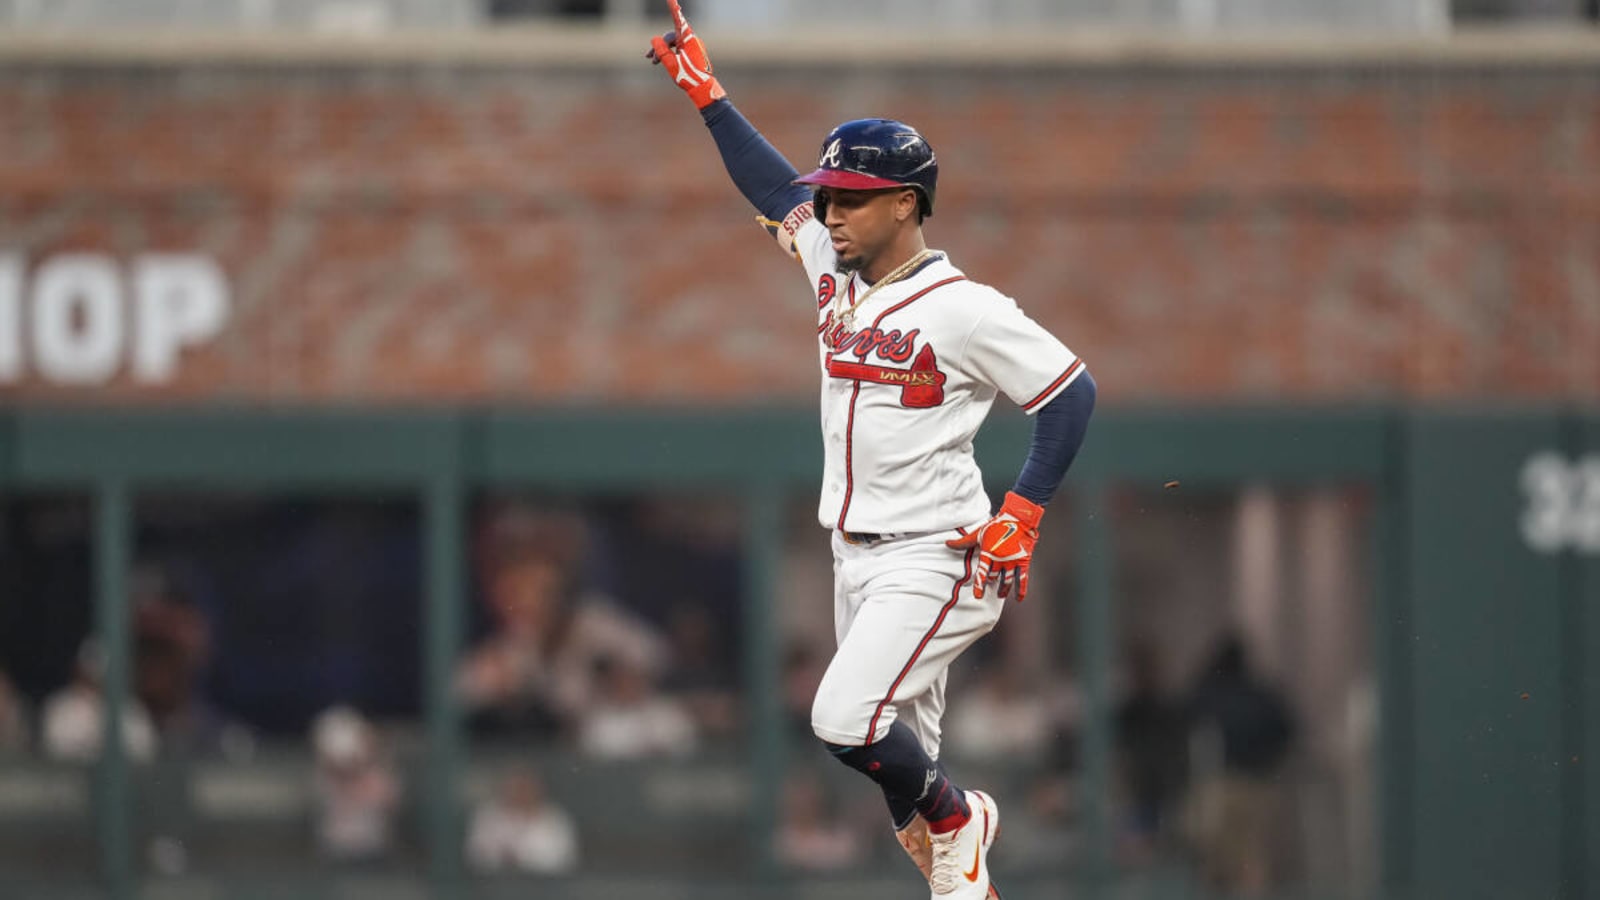 Watch: Ozzie Albies drives in Ronald Acuña Jr to tie the game in the 8th inning